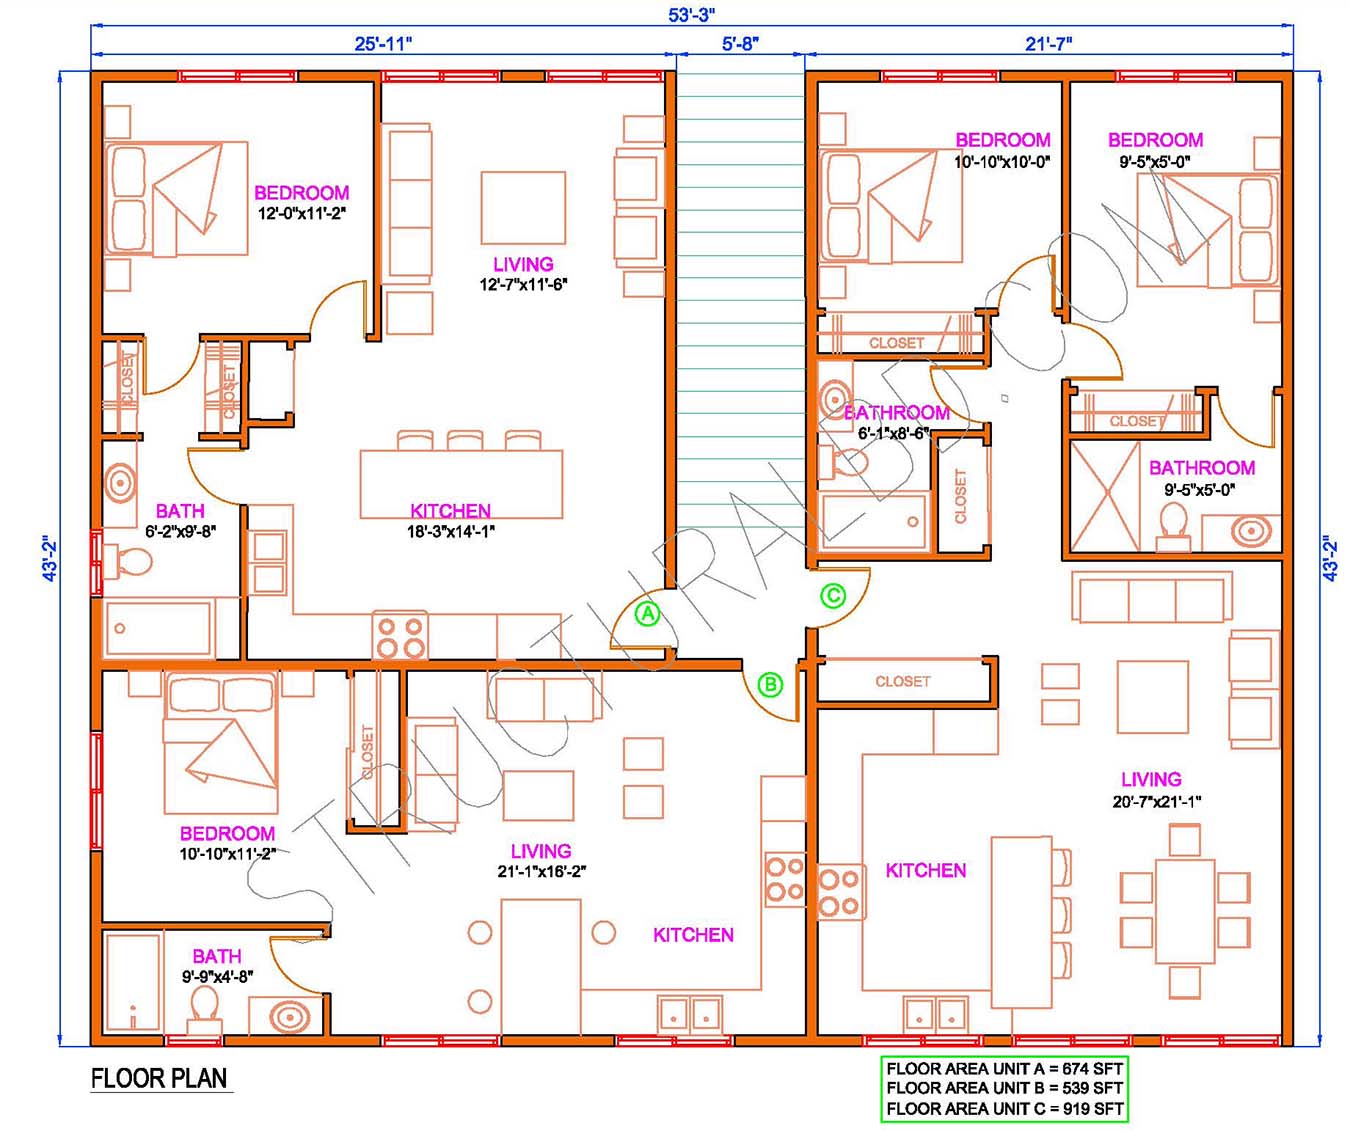 Modern Multi Family House Plans free Download